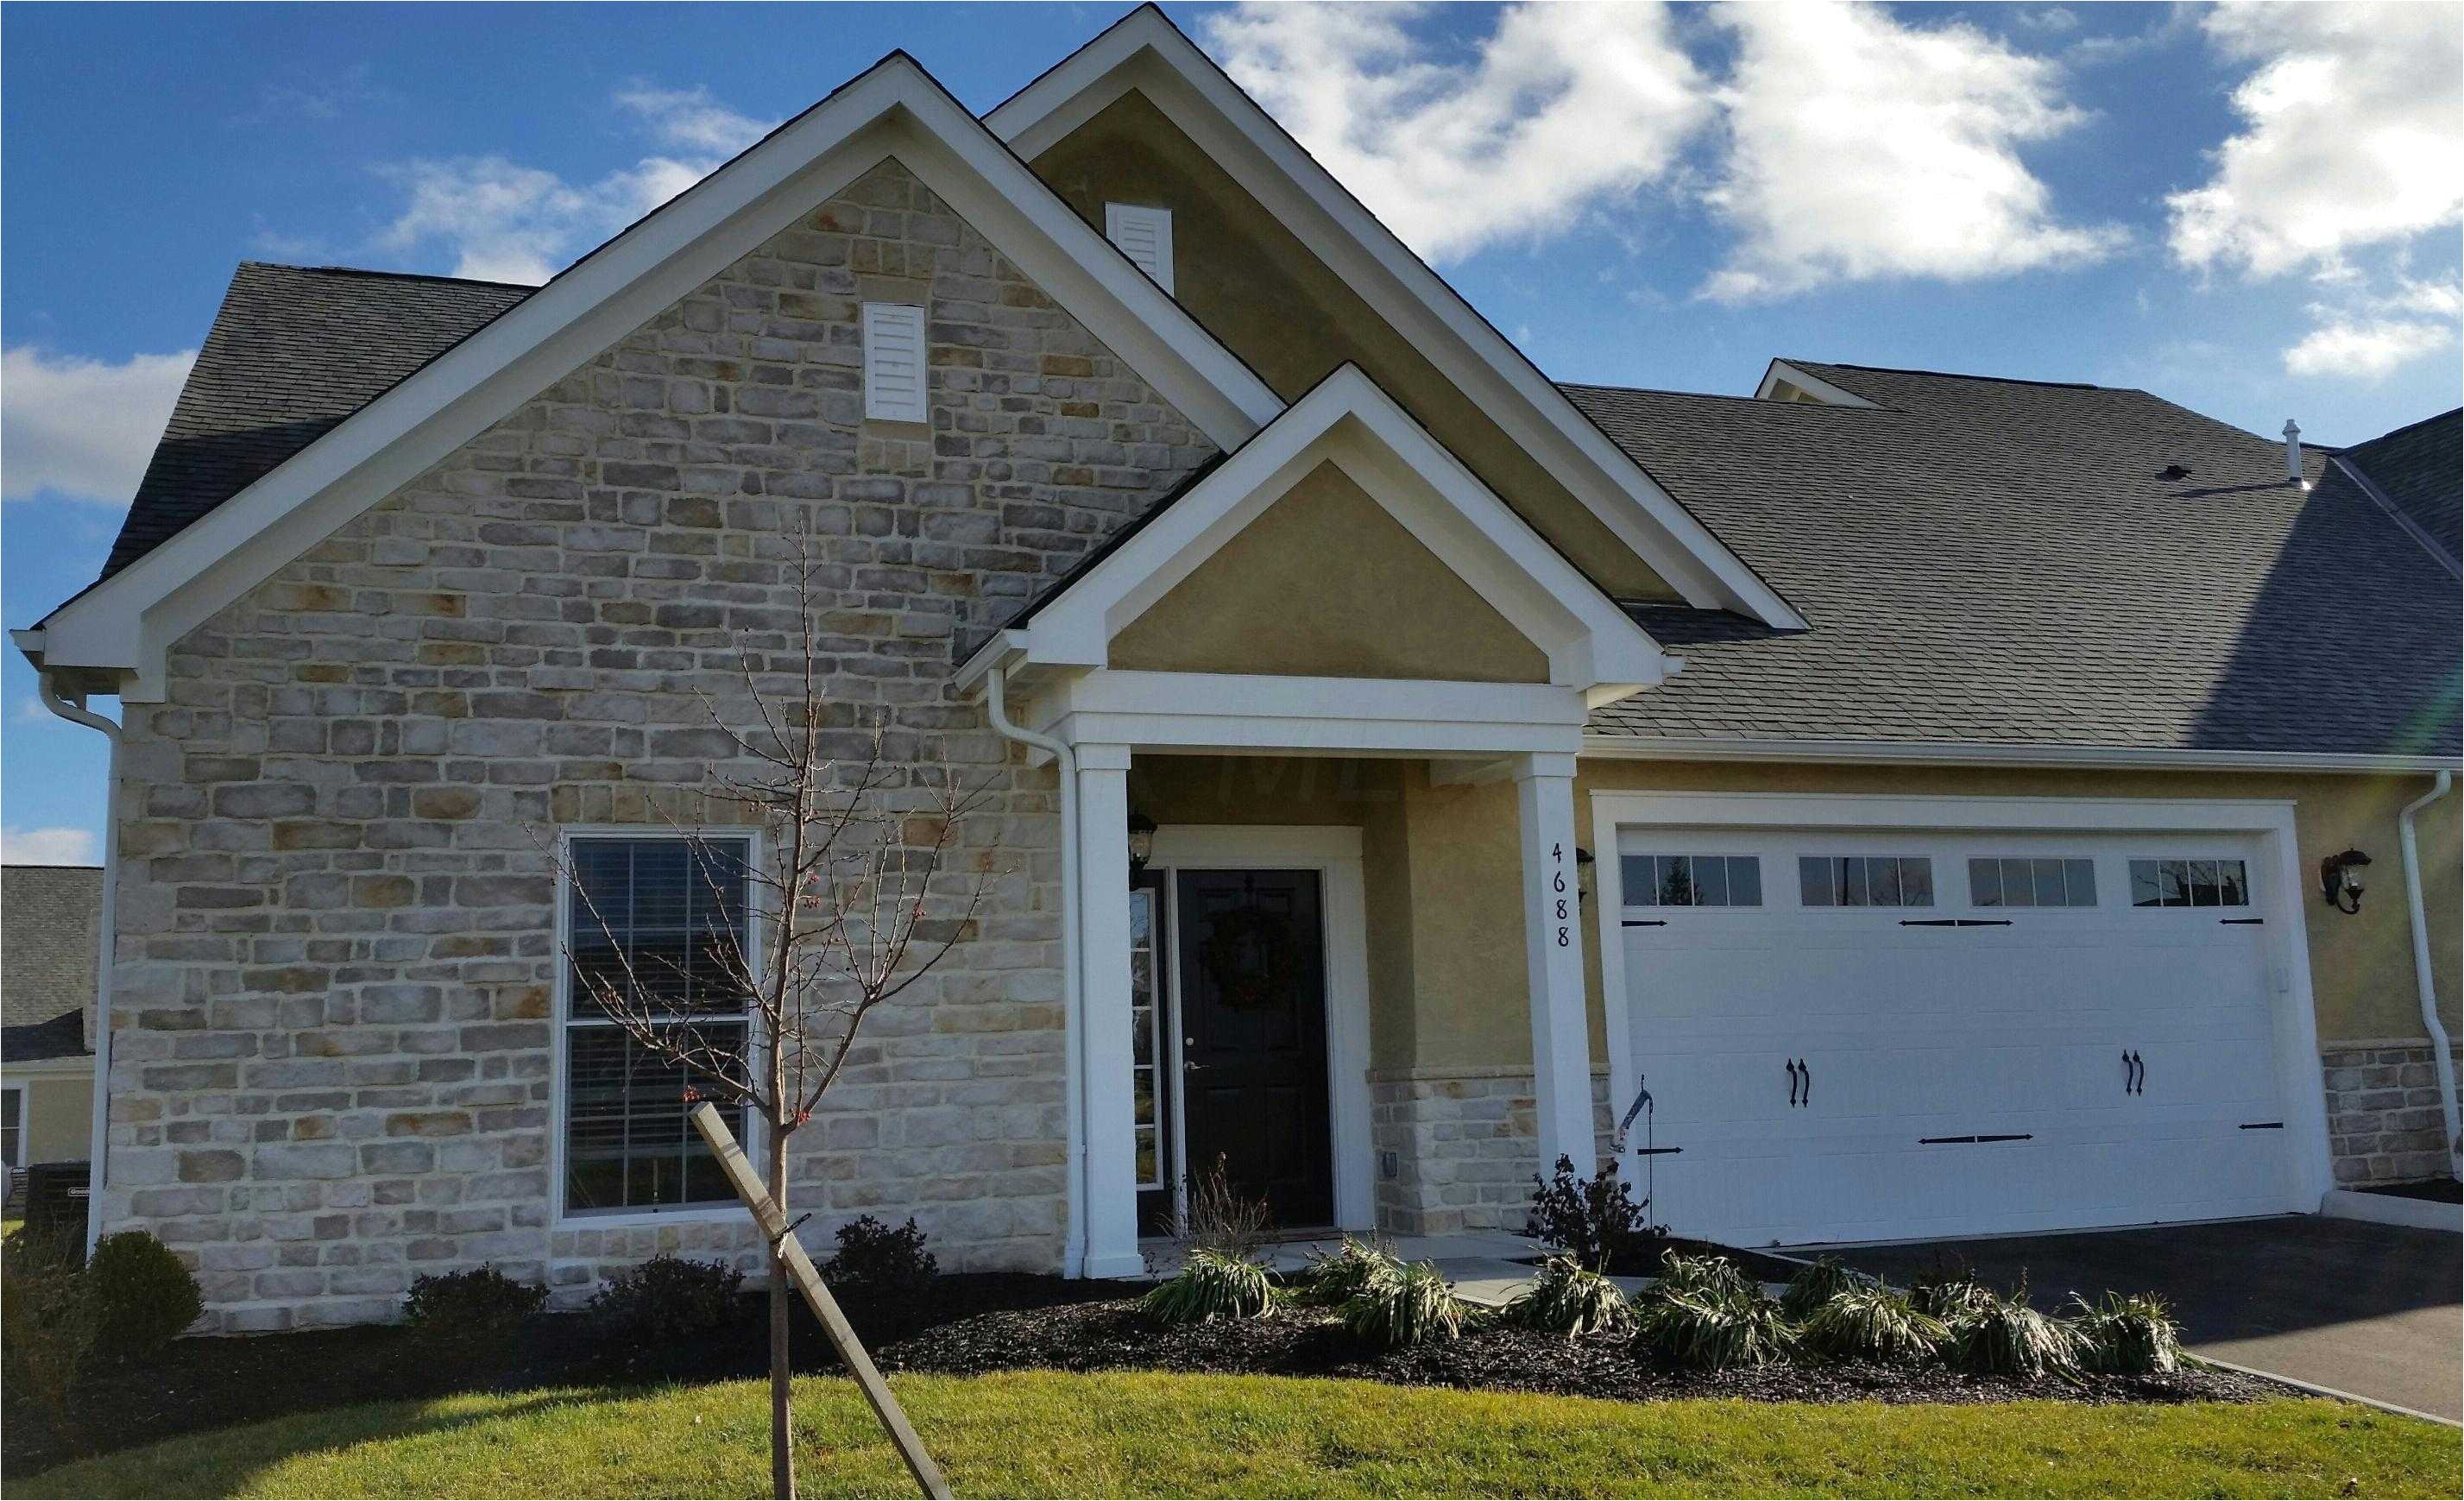 529000 3br 4ba for sale in the mews at pinnacle grove city